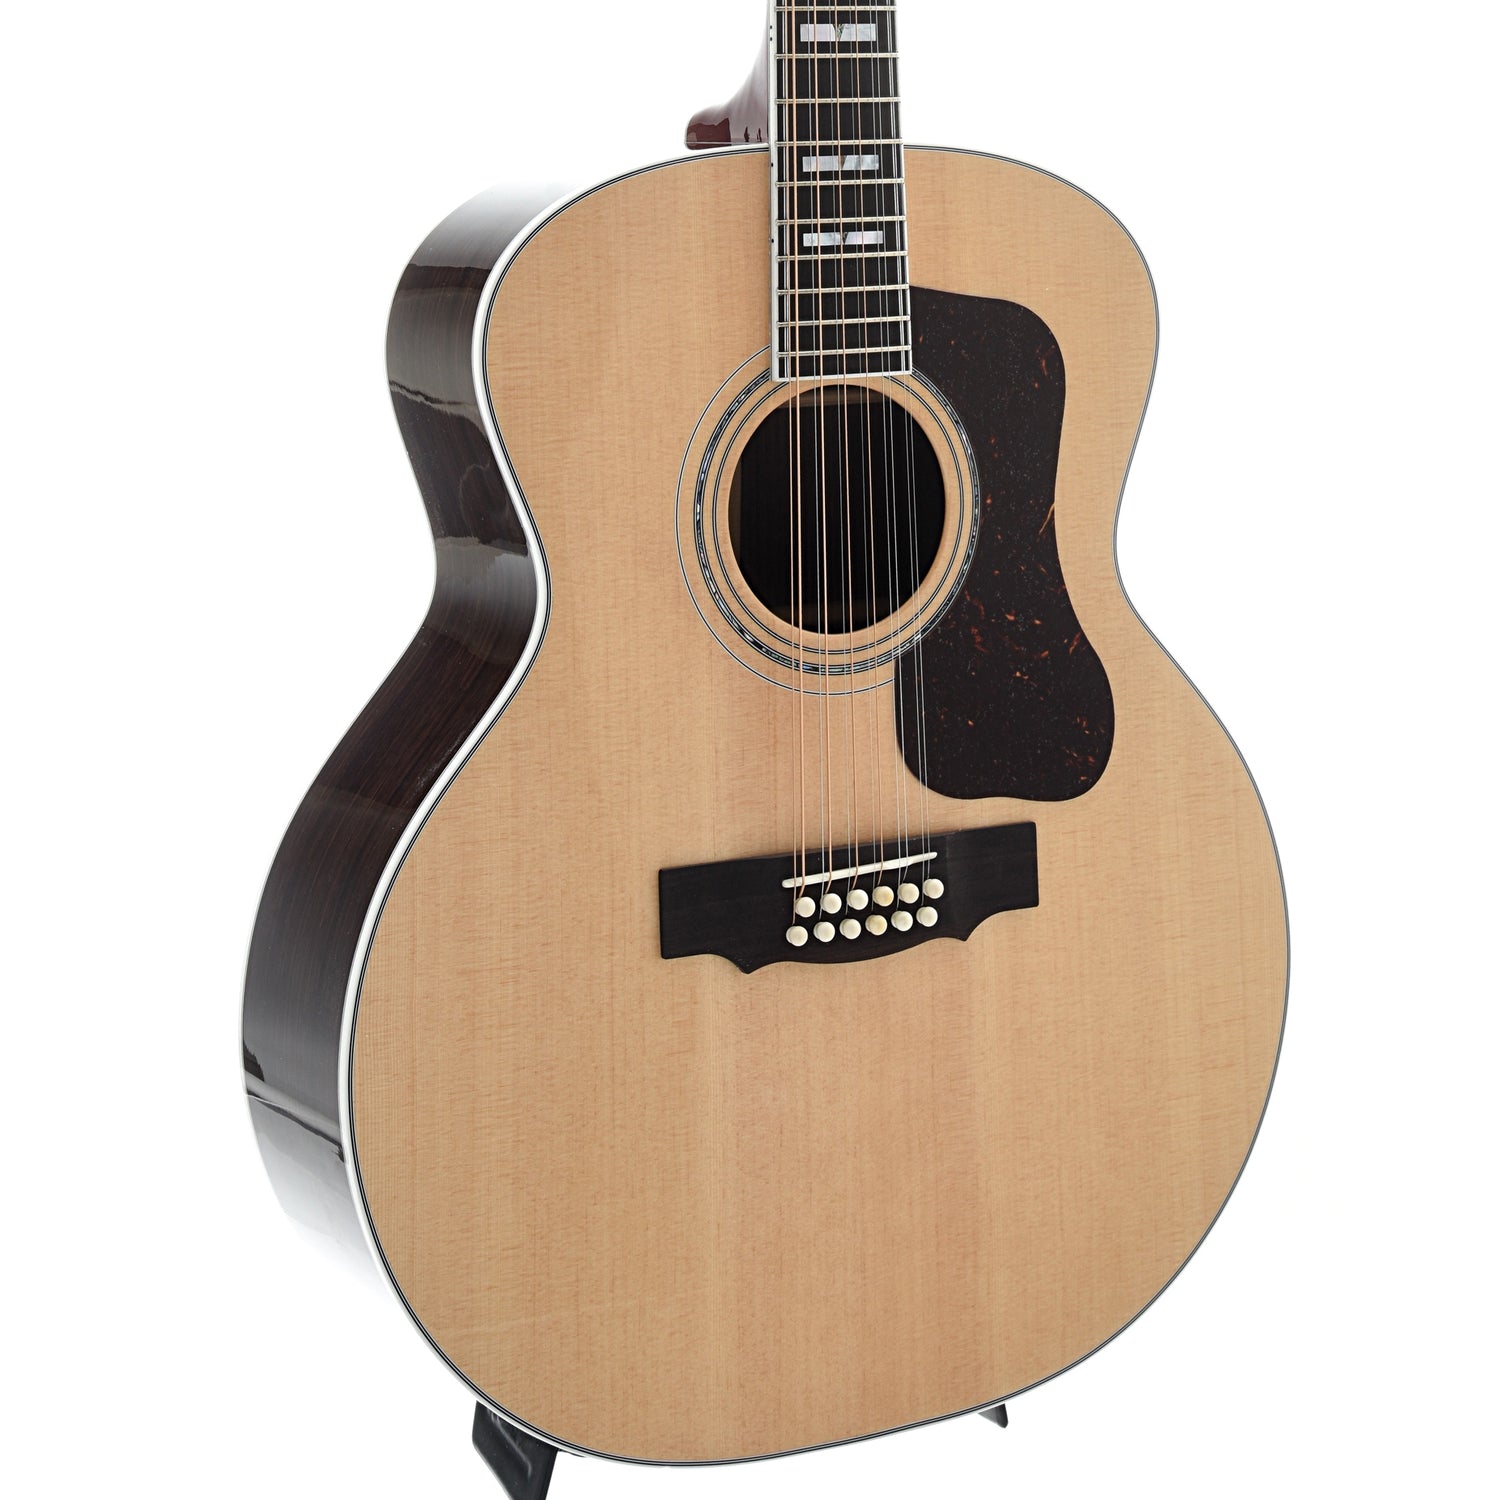 Image 2 of Guild USA F-512 12-String Acoustic Guitar with Case - SKU# F512-NAT : Product Type 12-String Guitars : Elderly Instruments